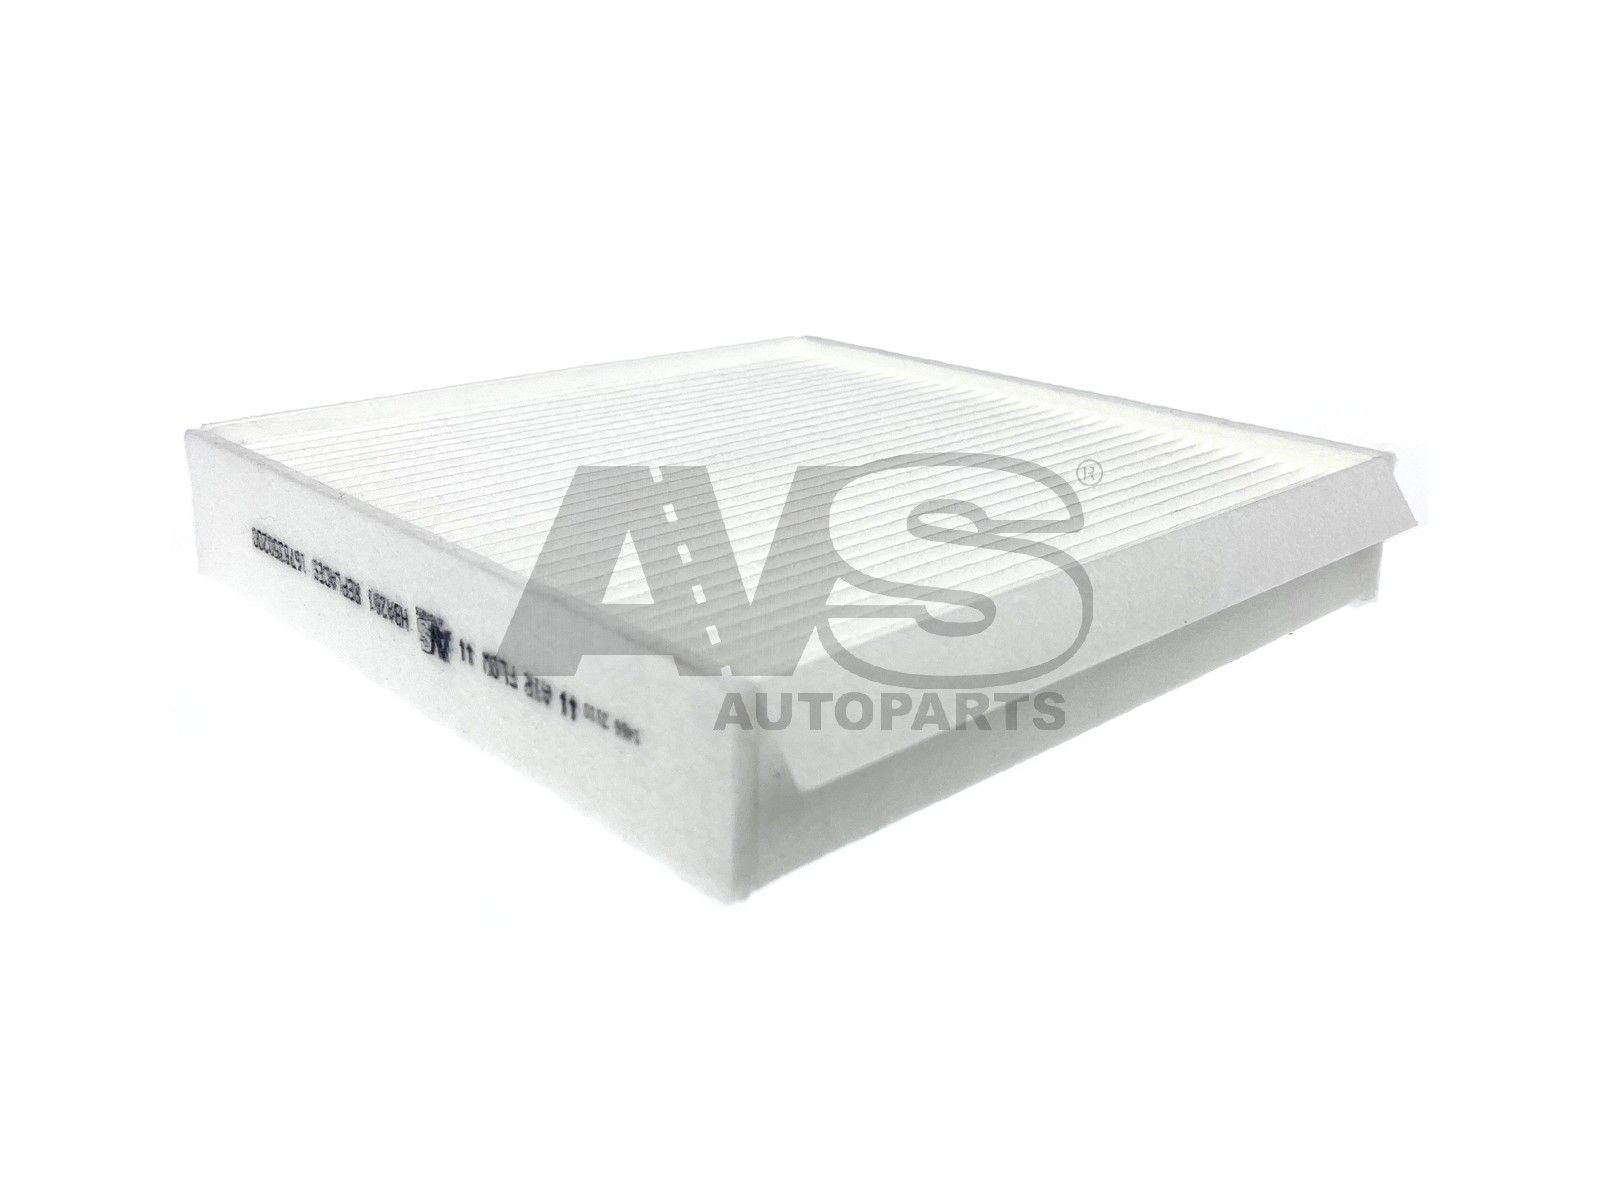 AVS AUTOPARTS Air conditioning filter HBA281 suitable for MERCEDES-BENZ GLE, GLS